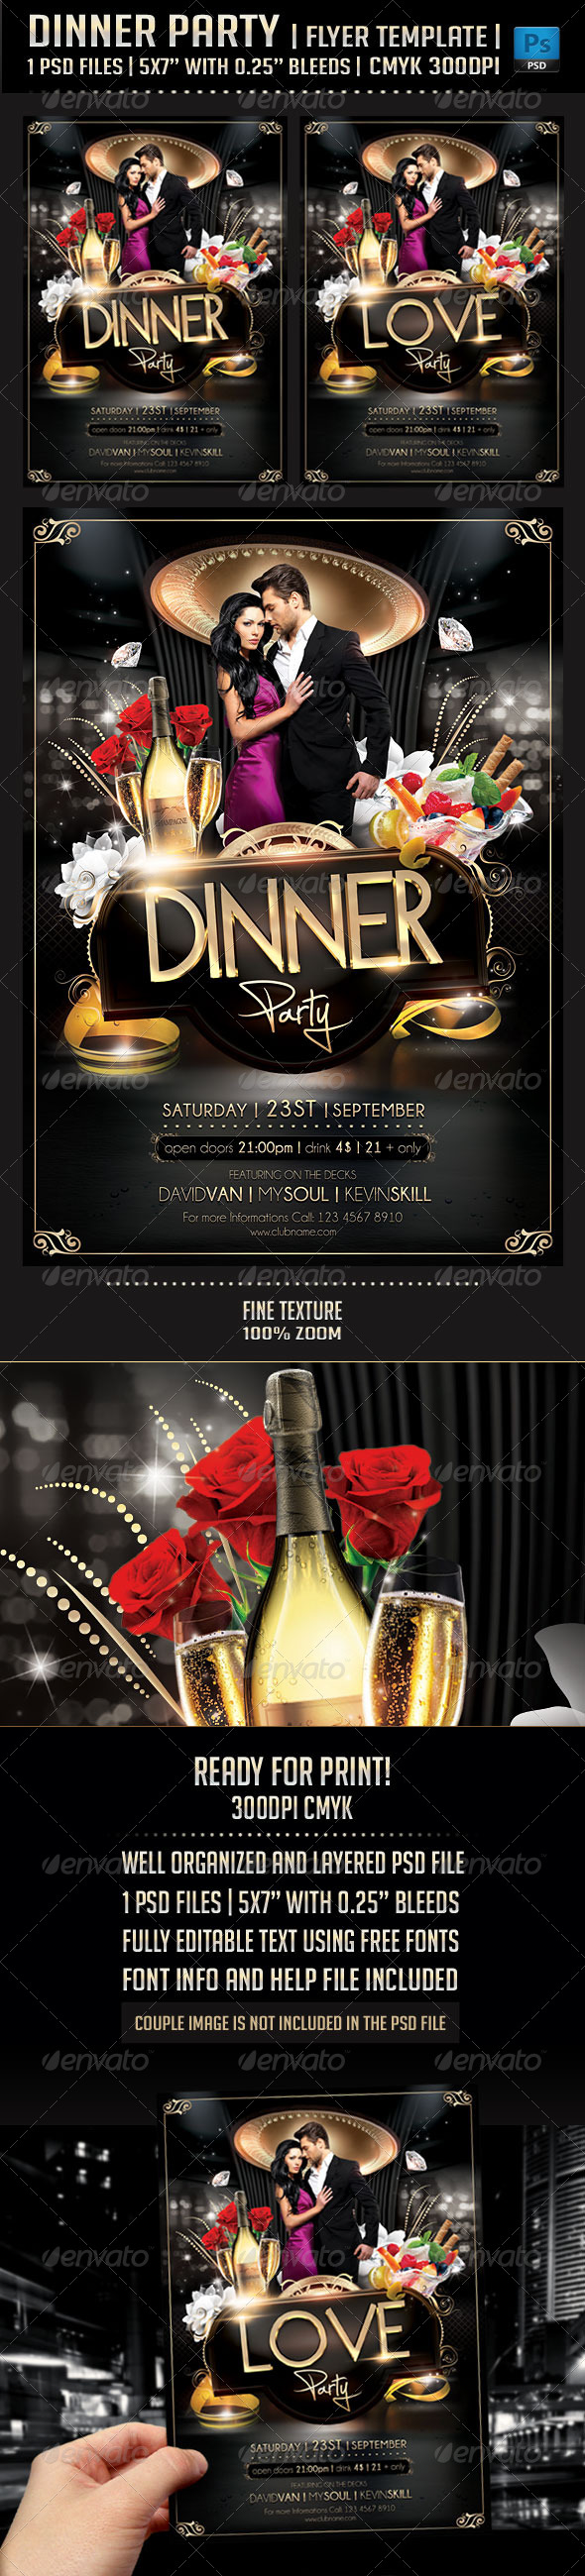 PSD - Dinner Party Flyer Template